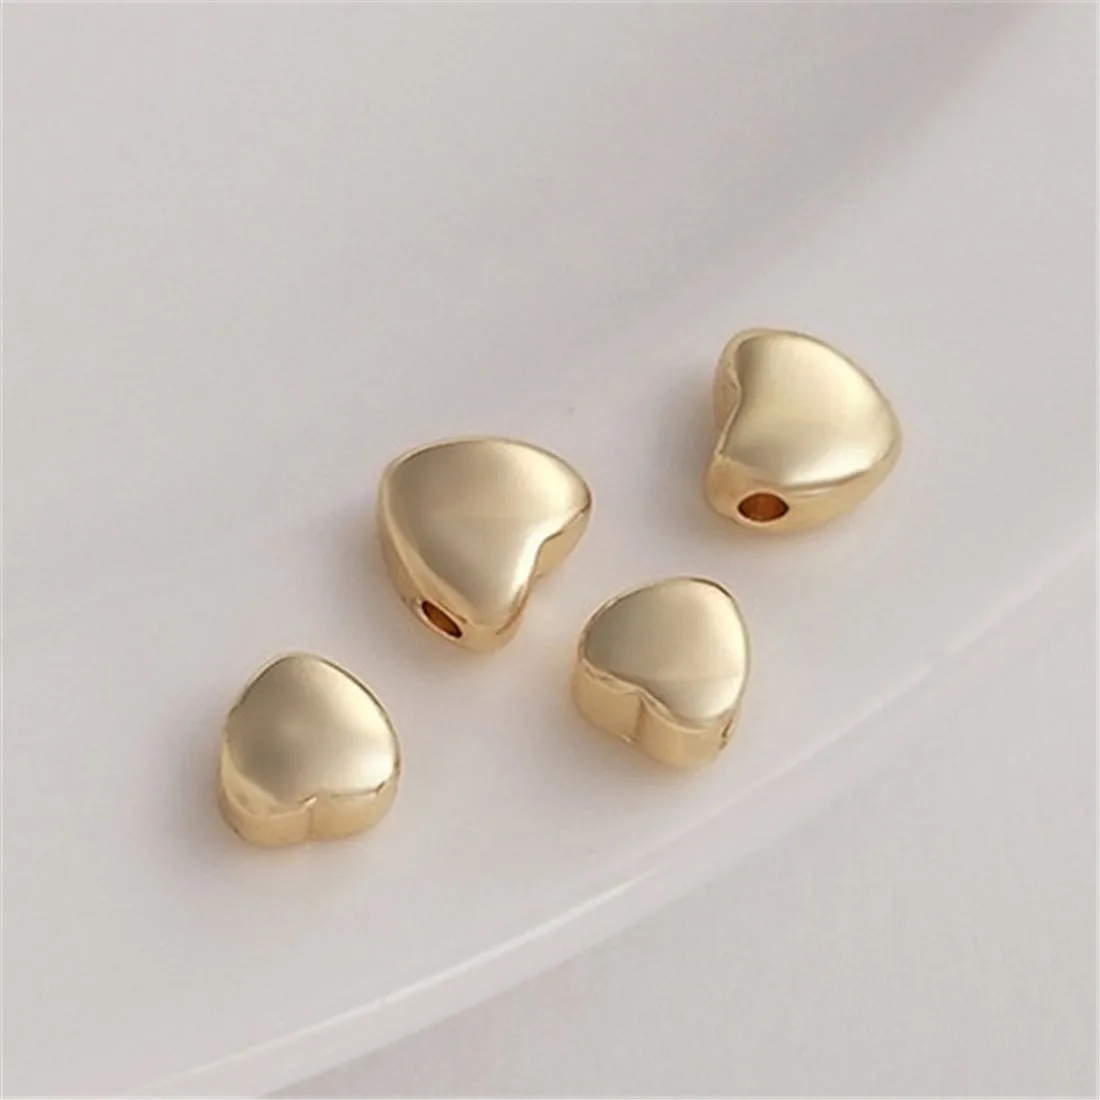 

14K Genuine Gold Double Curved Peach Heart Shaped Separated Beads Heart-shaped Loose Beads Handmade DIY Bracelets Jewelry C242